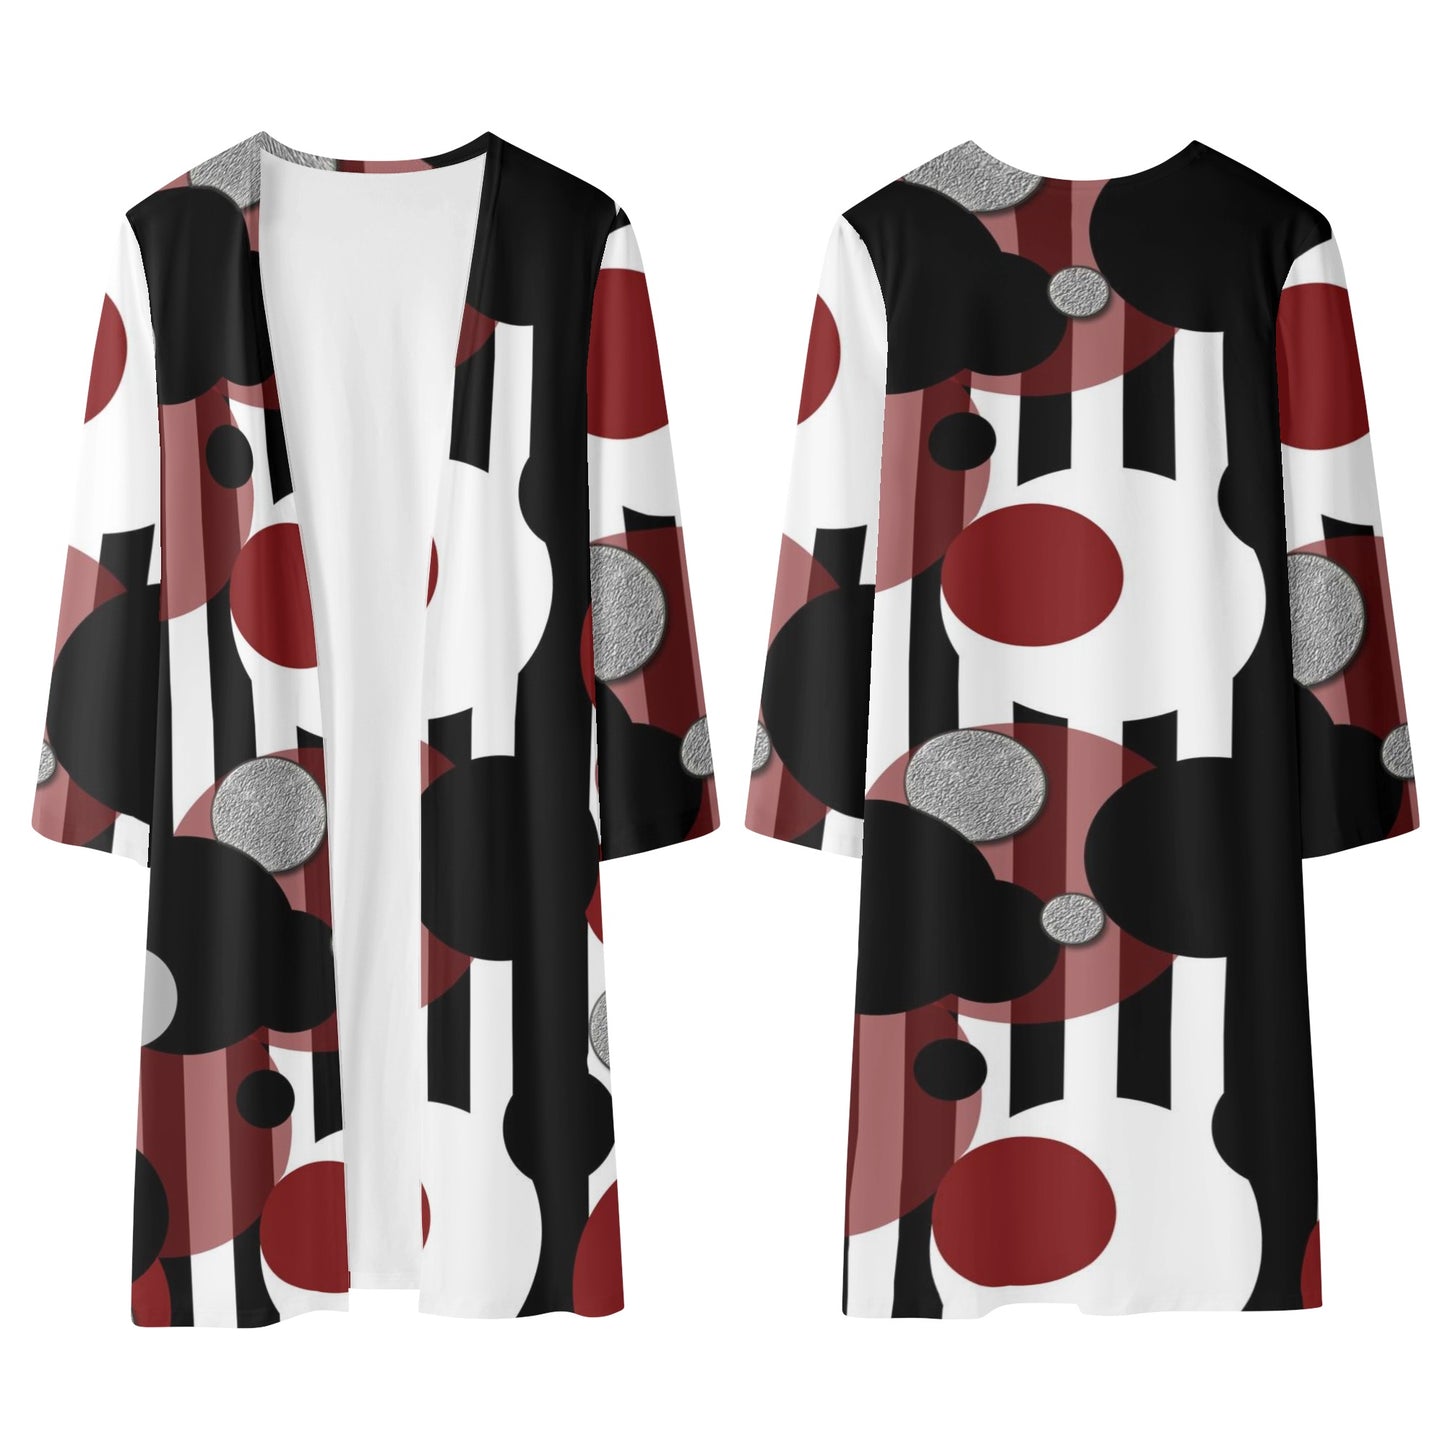 Black and White Stripes Red Dots Womens Long Sleeve Jacket Cardigan